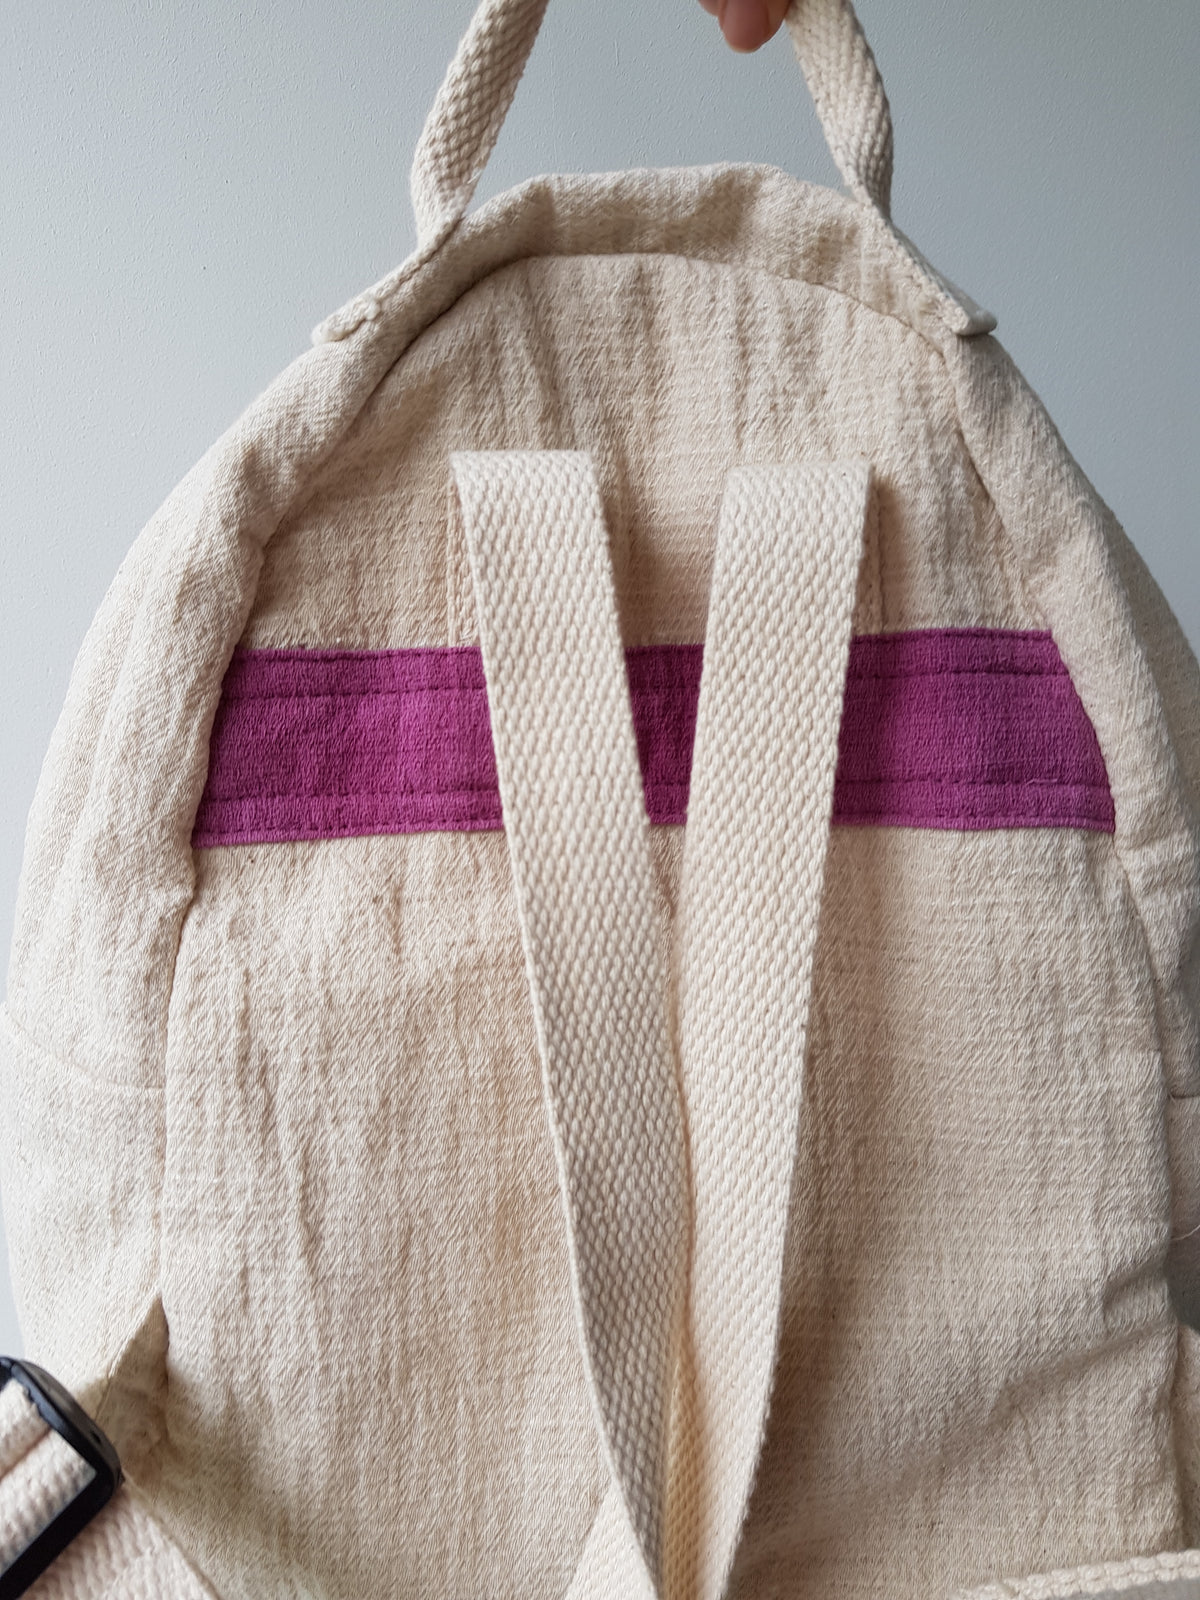 Nami Hand Embroidered Bagpack (White fabric w Purple stitches)